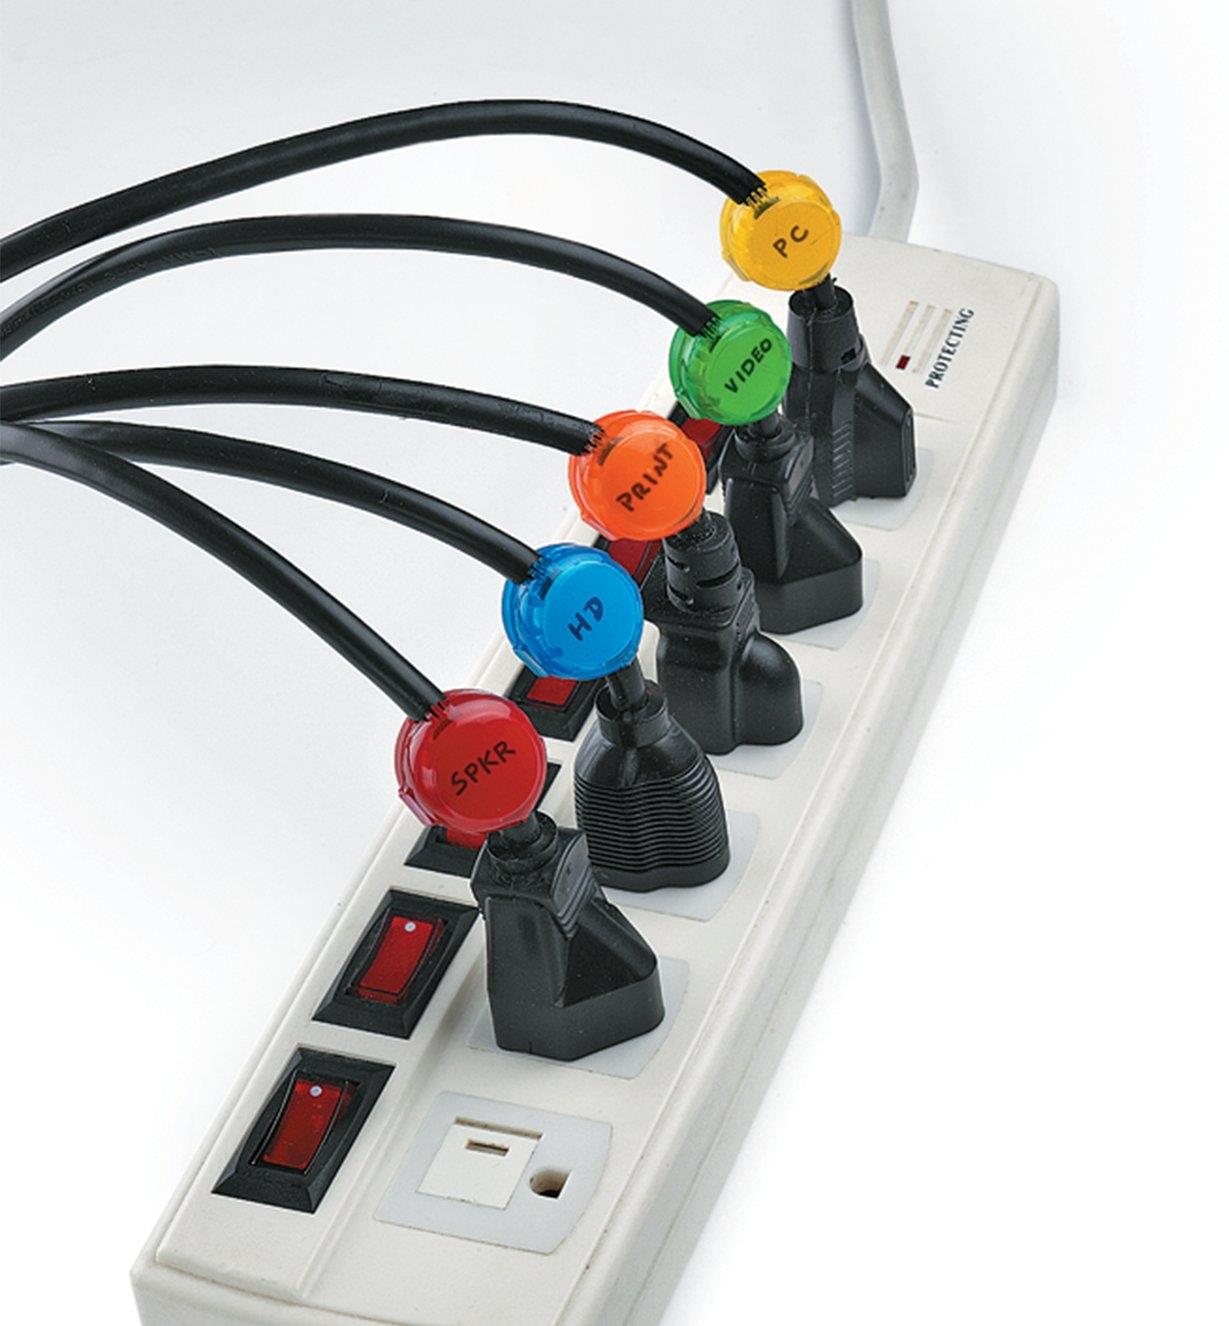 A power bar with five cords plugged in, each with a different-colored cord identifier attached